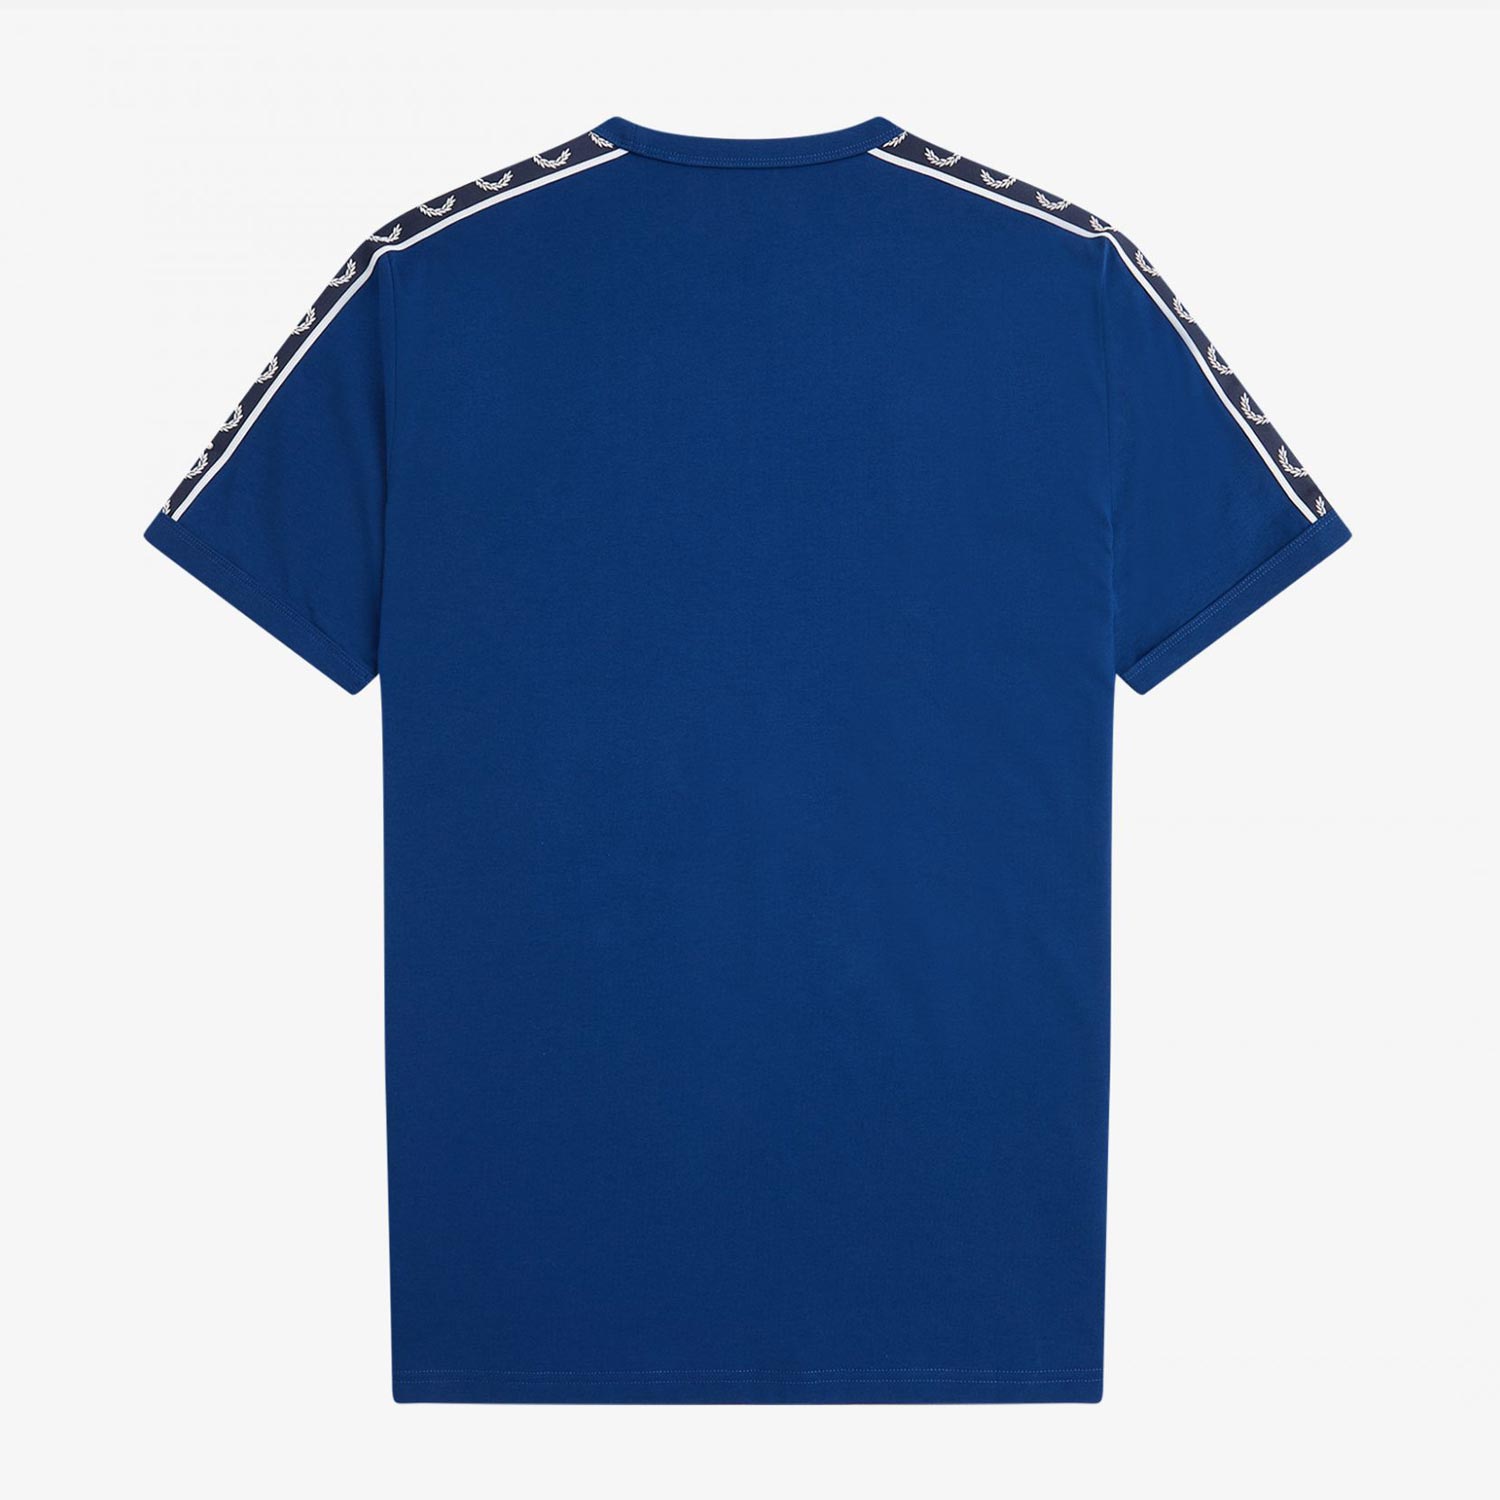 Fred Perry Contrast Tape Ringer Regular Fit Short Sleeve Tee - Shaded Cobalt/Navy